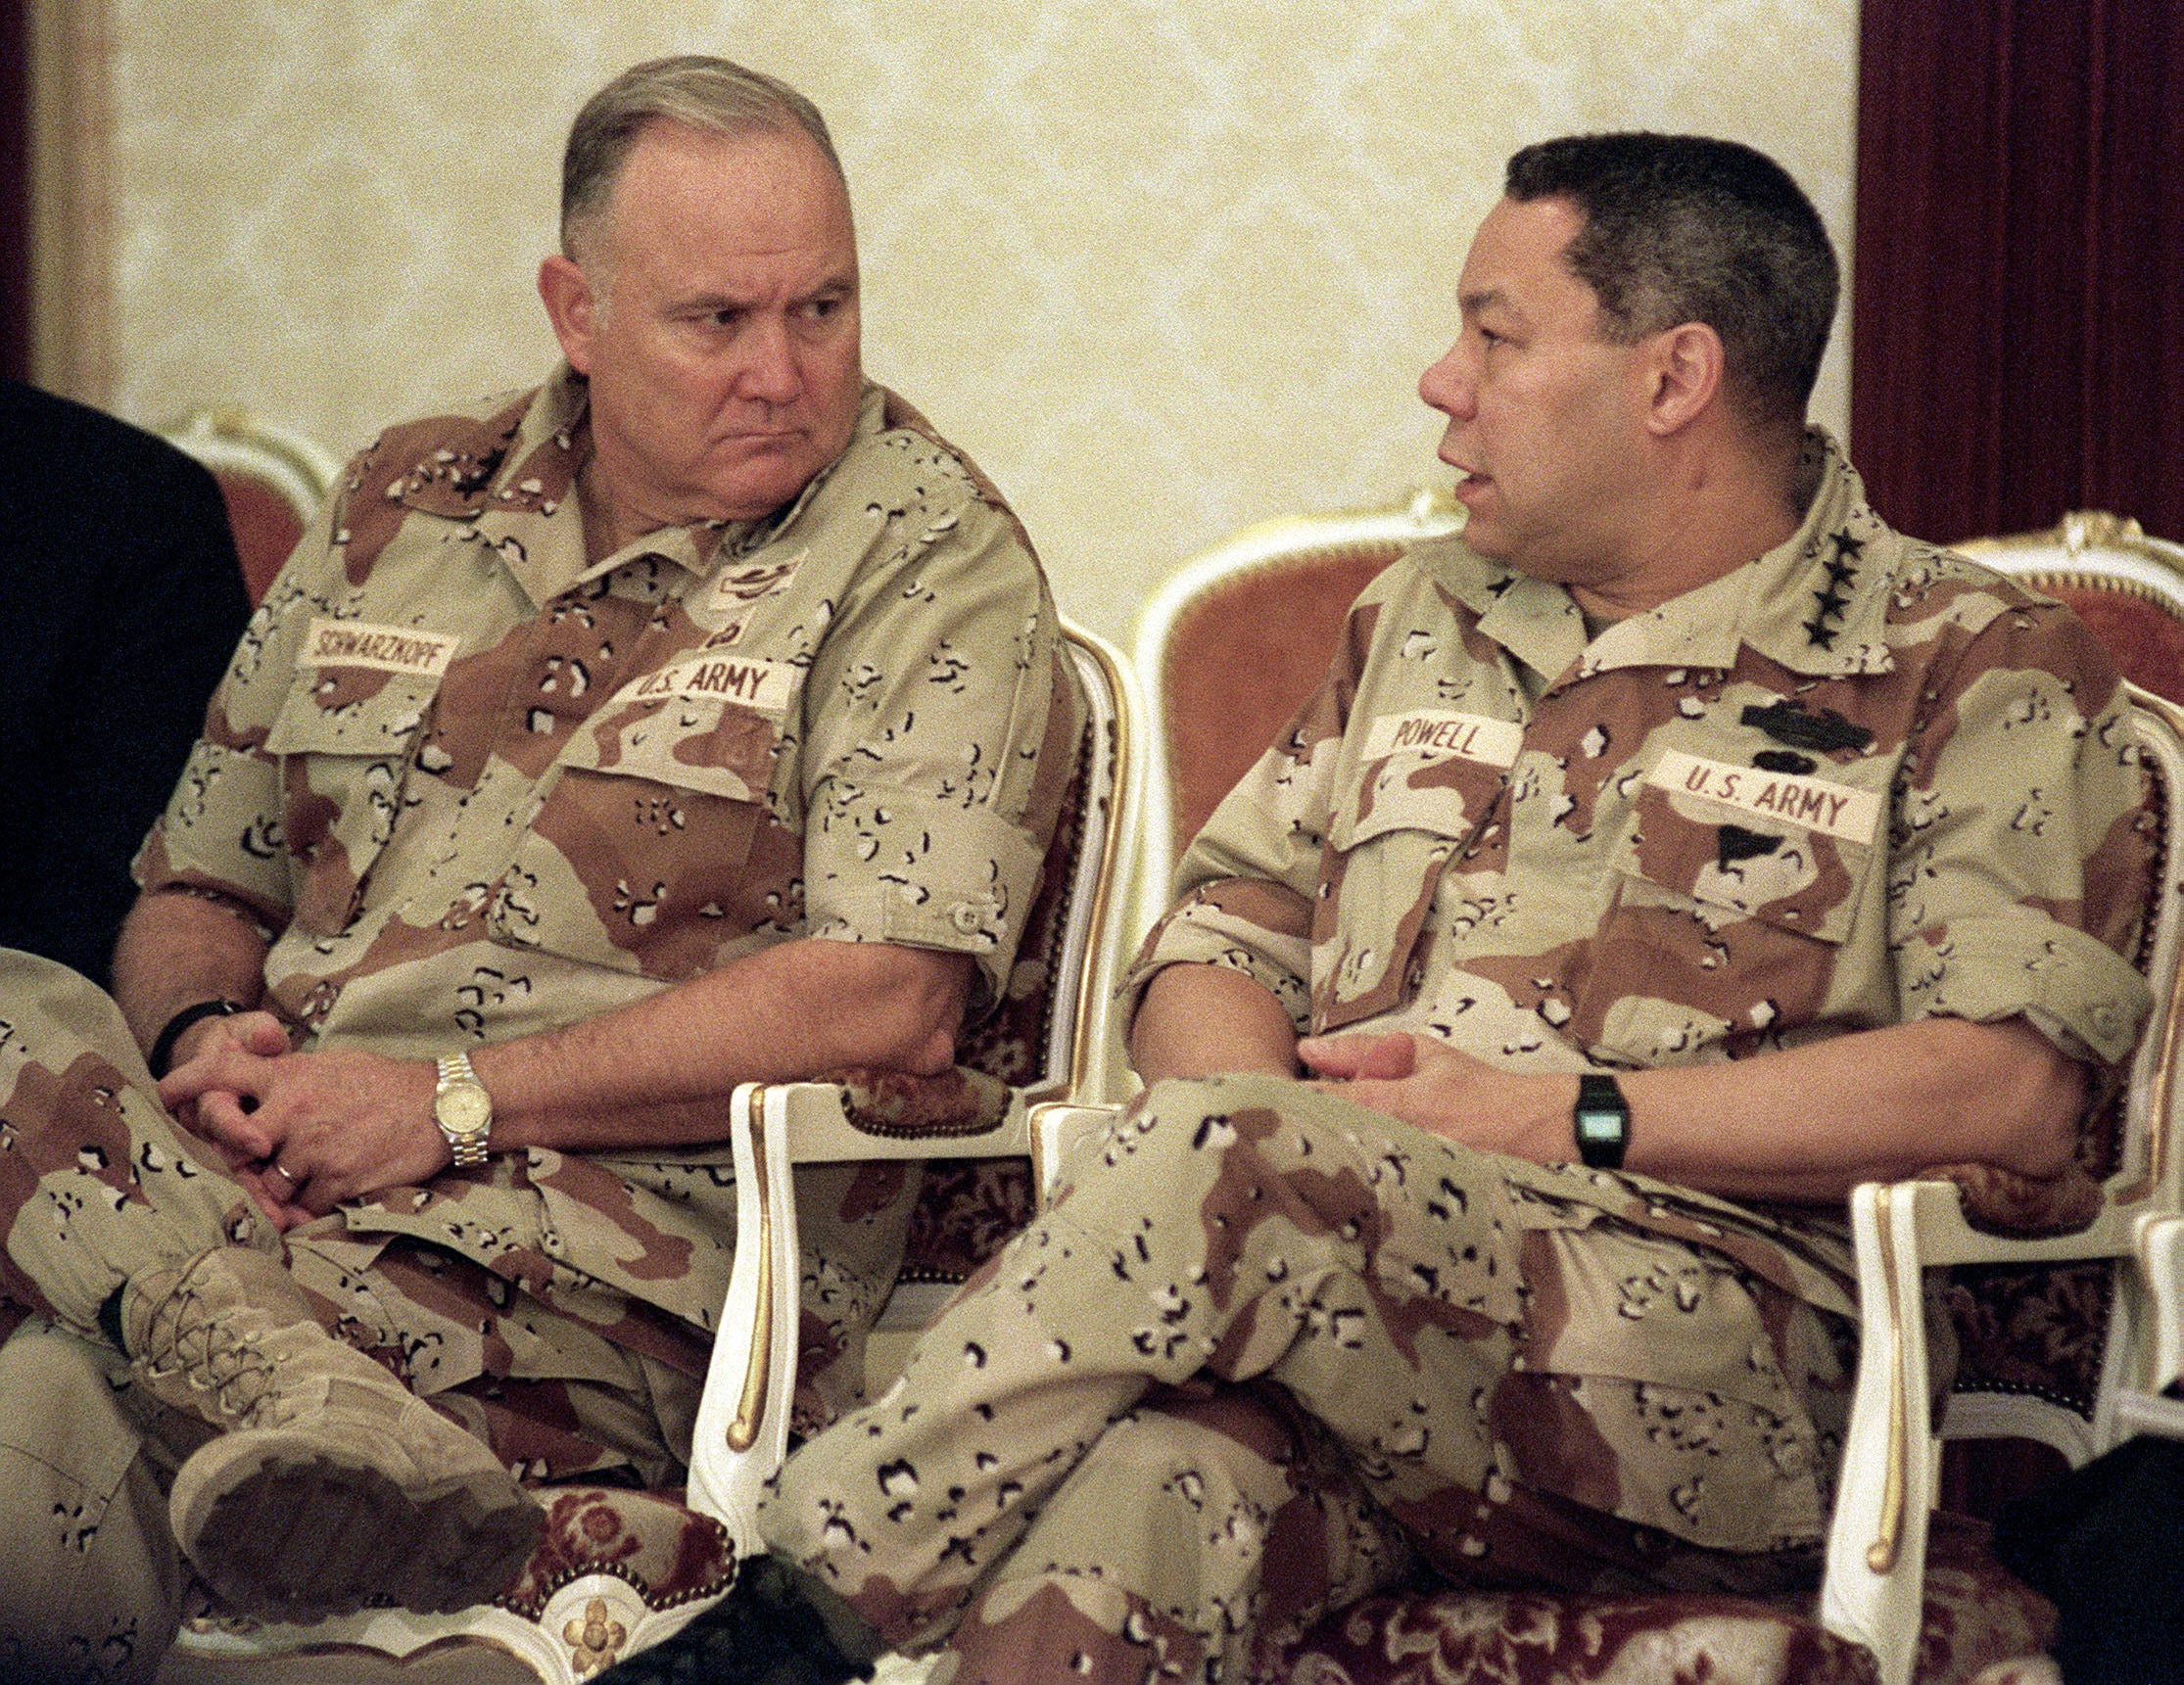 As chair of the Joint Chiefs of Staff, Powell oversaw 1991 operation to oust Saddam Hussein from Kuwait